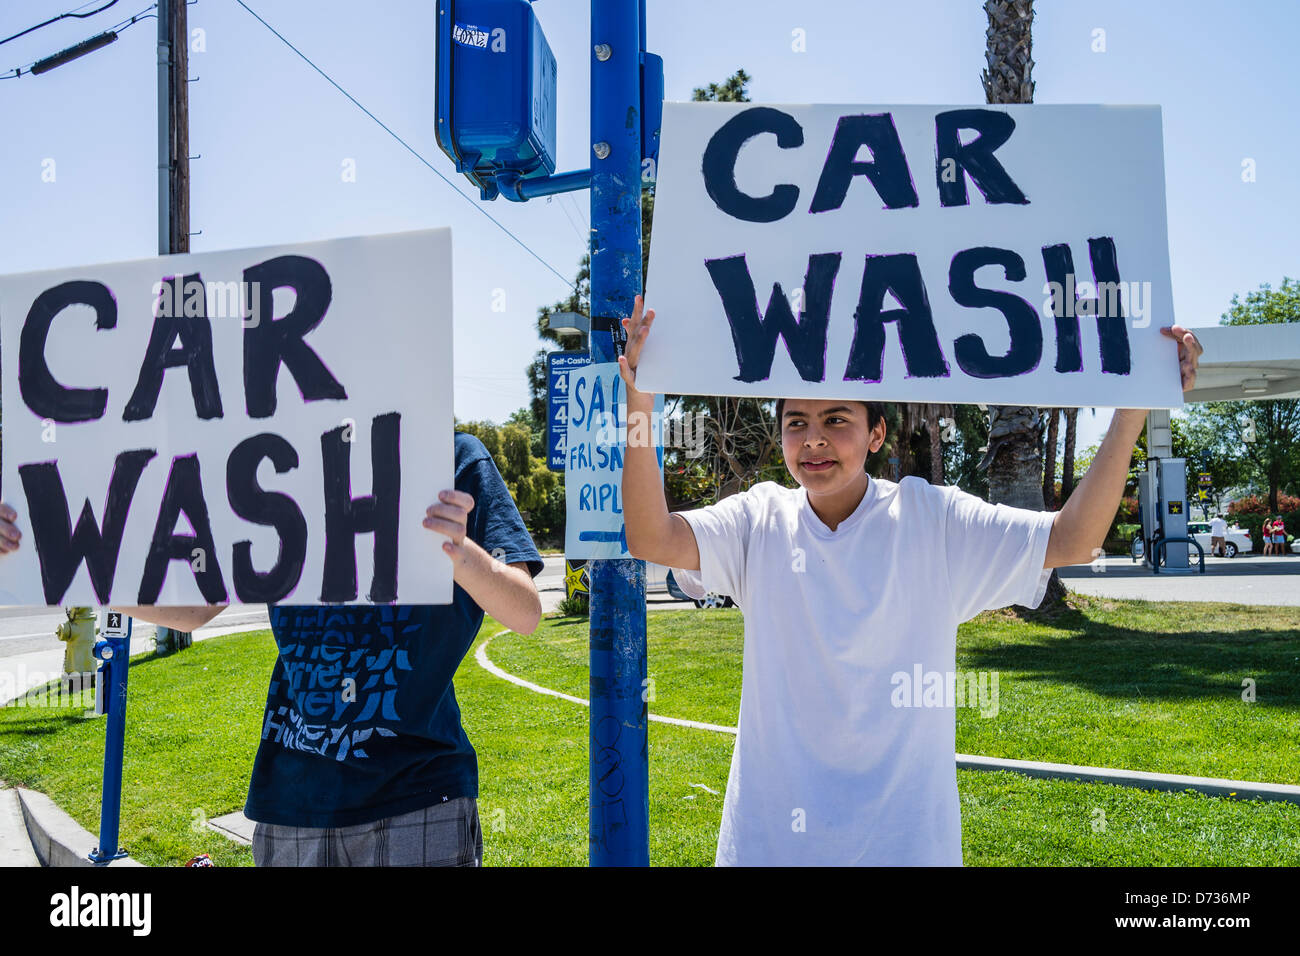 Two high school students, trying to get business, hold up signs that read 'Car Wash' at a busy intersection. Stock Photo